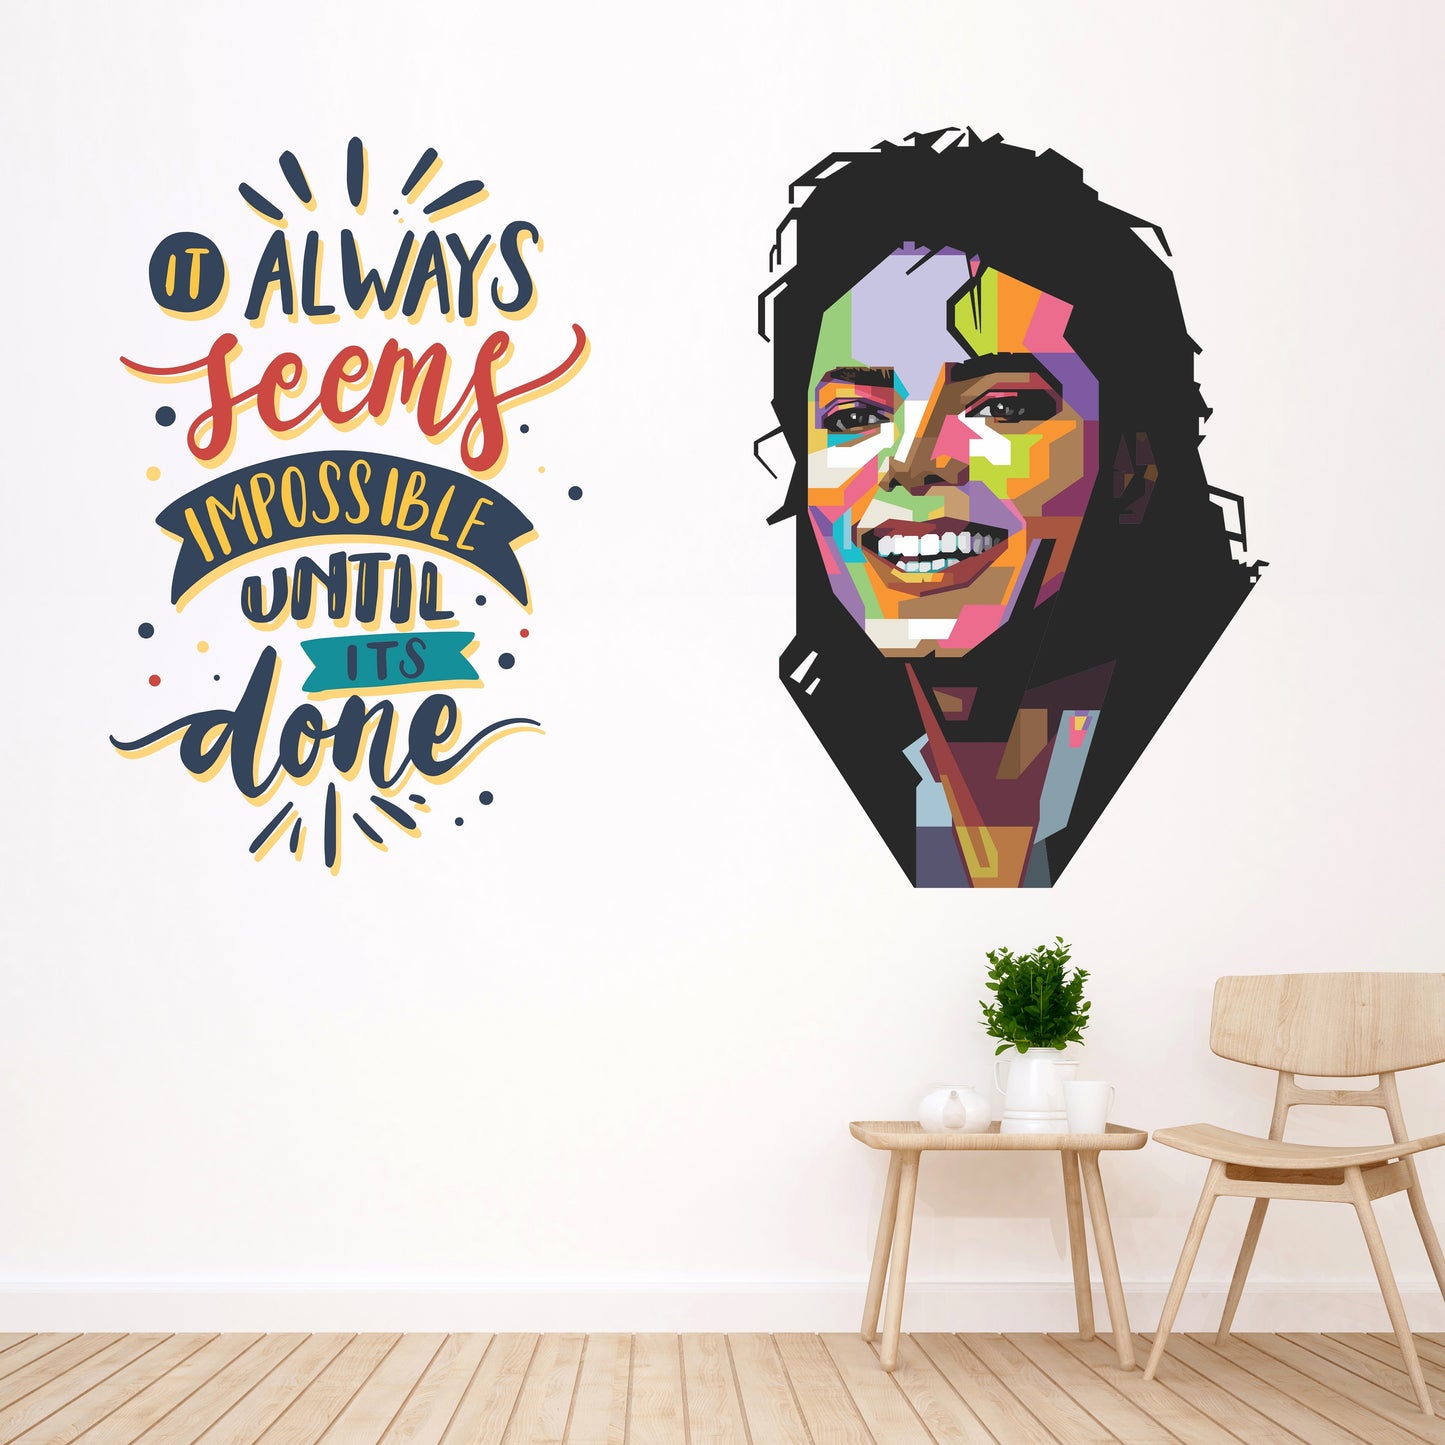 iberry's Inspirational Motivational Quotes Wall Sticker, Always Seems Impossible Until Done"- 44 x 65 cm Wall Stickers for Study- Office-2